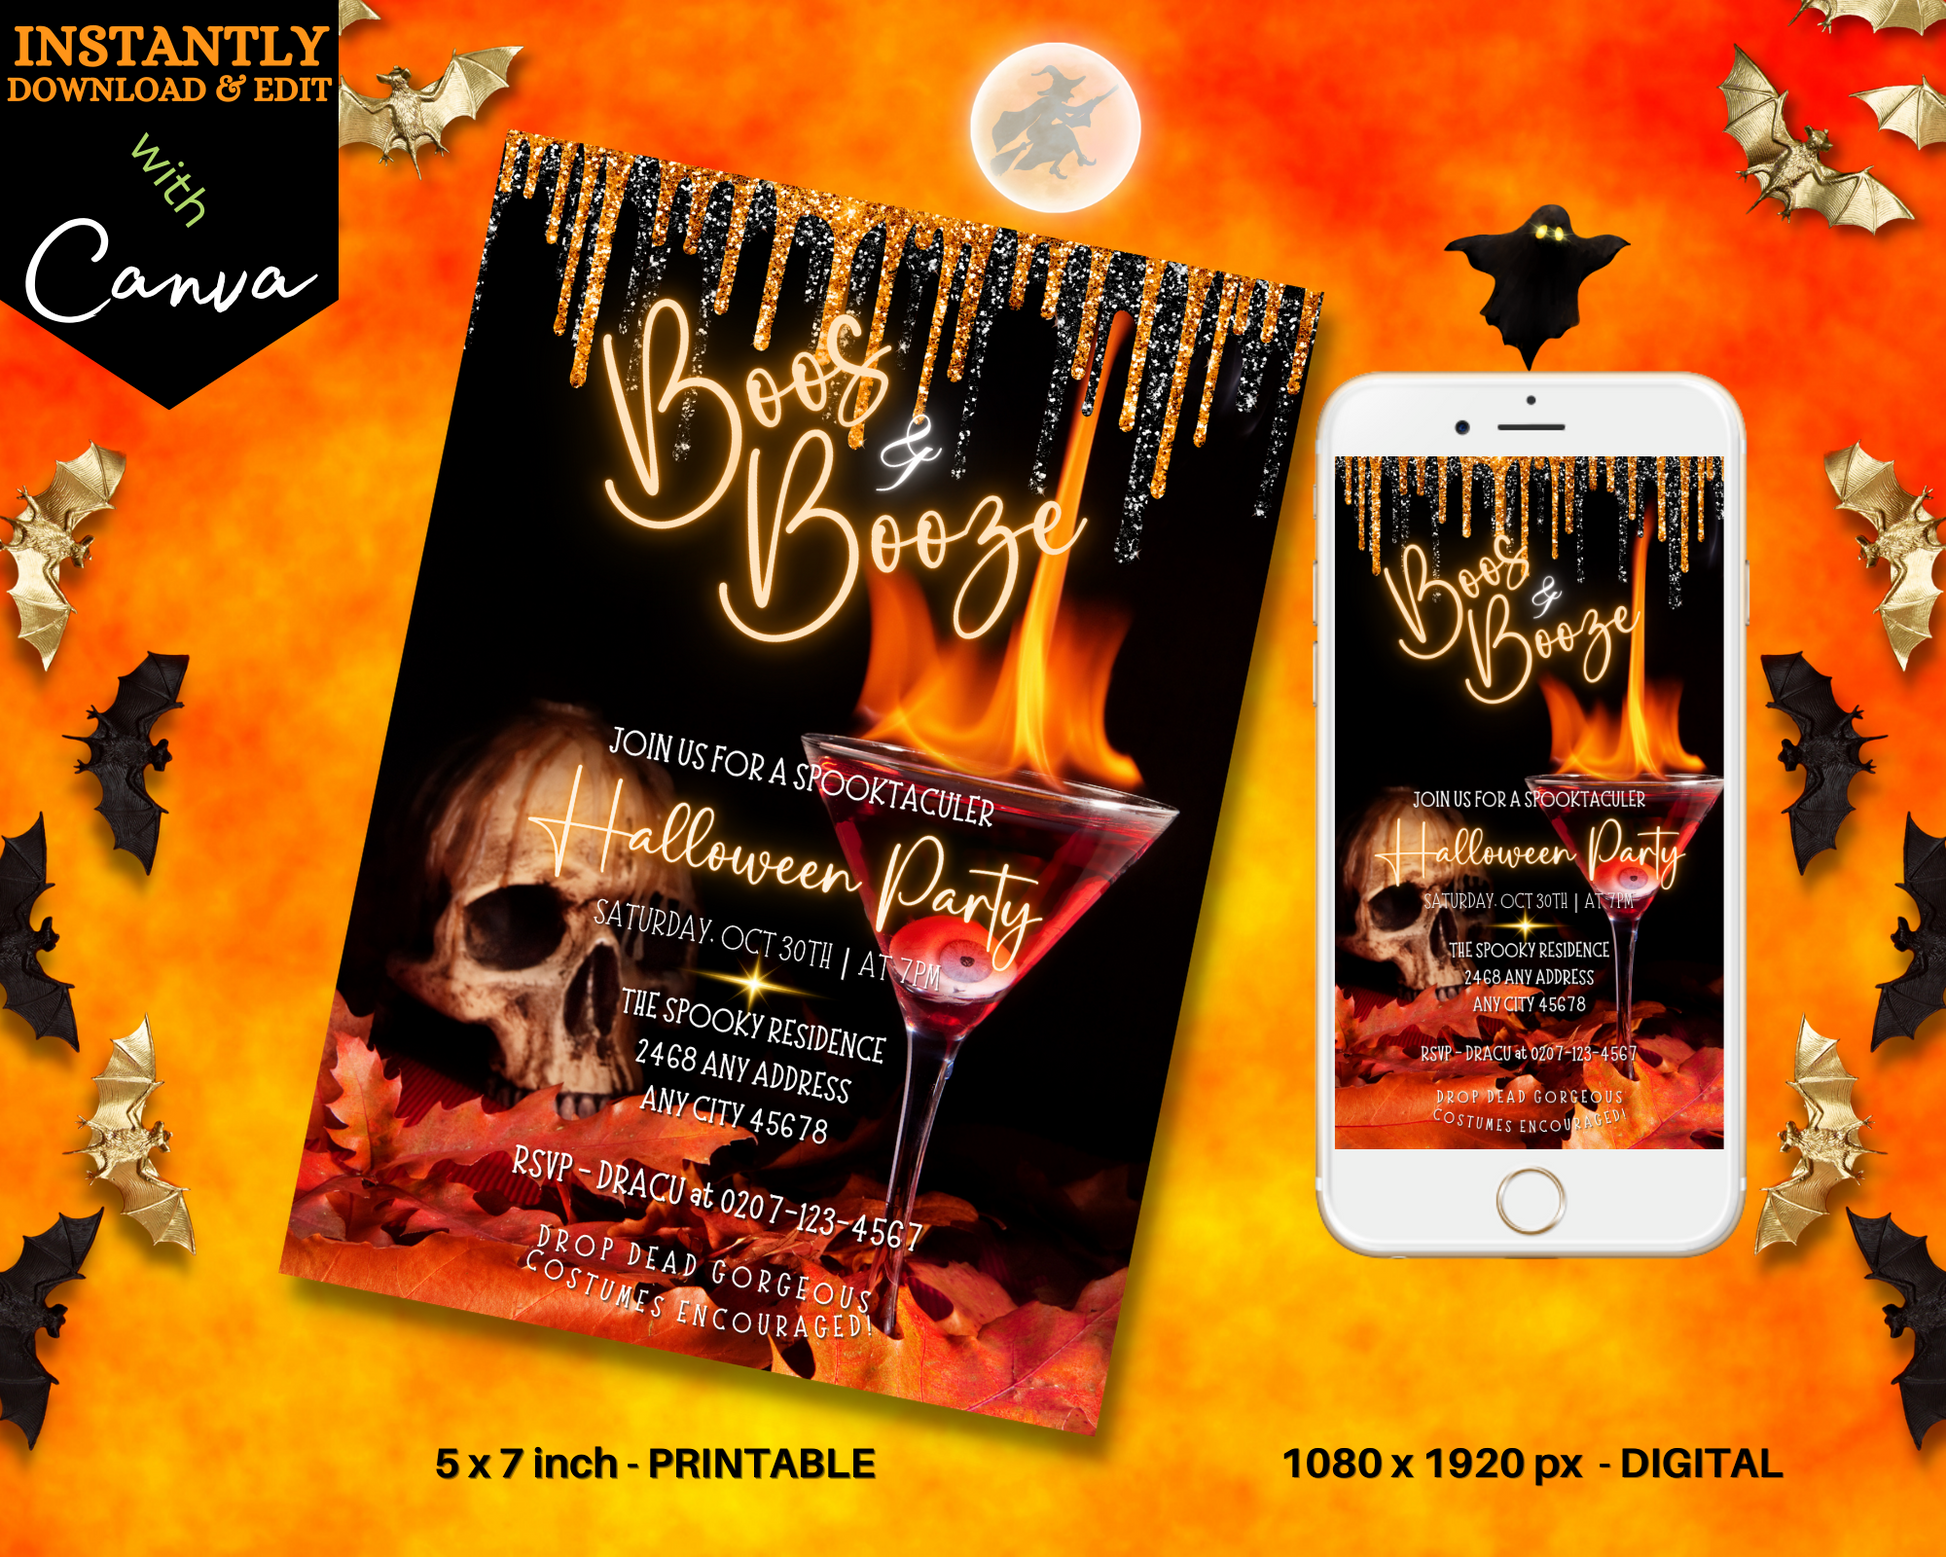 Cell phone displaying a Halloween party evite with a skull and flaming eyeball cocktail glass, alongside a matching poster.